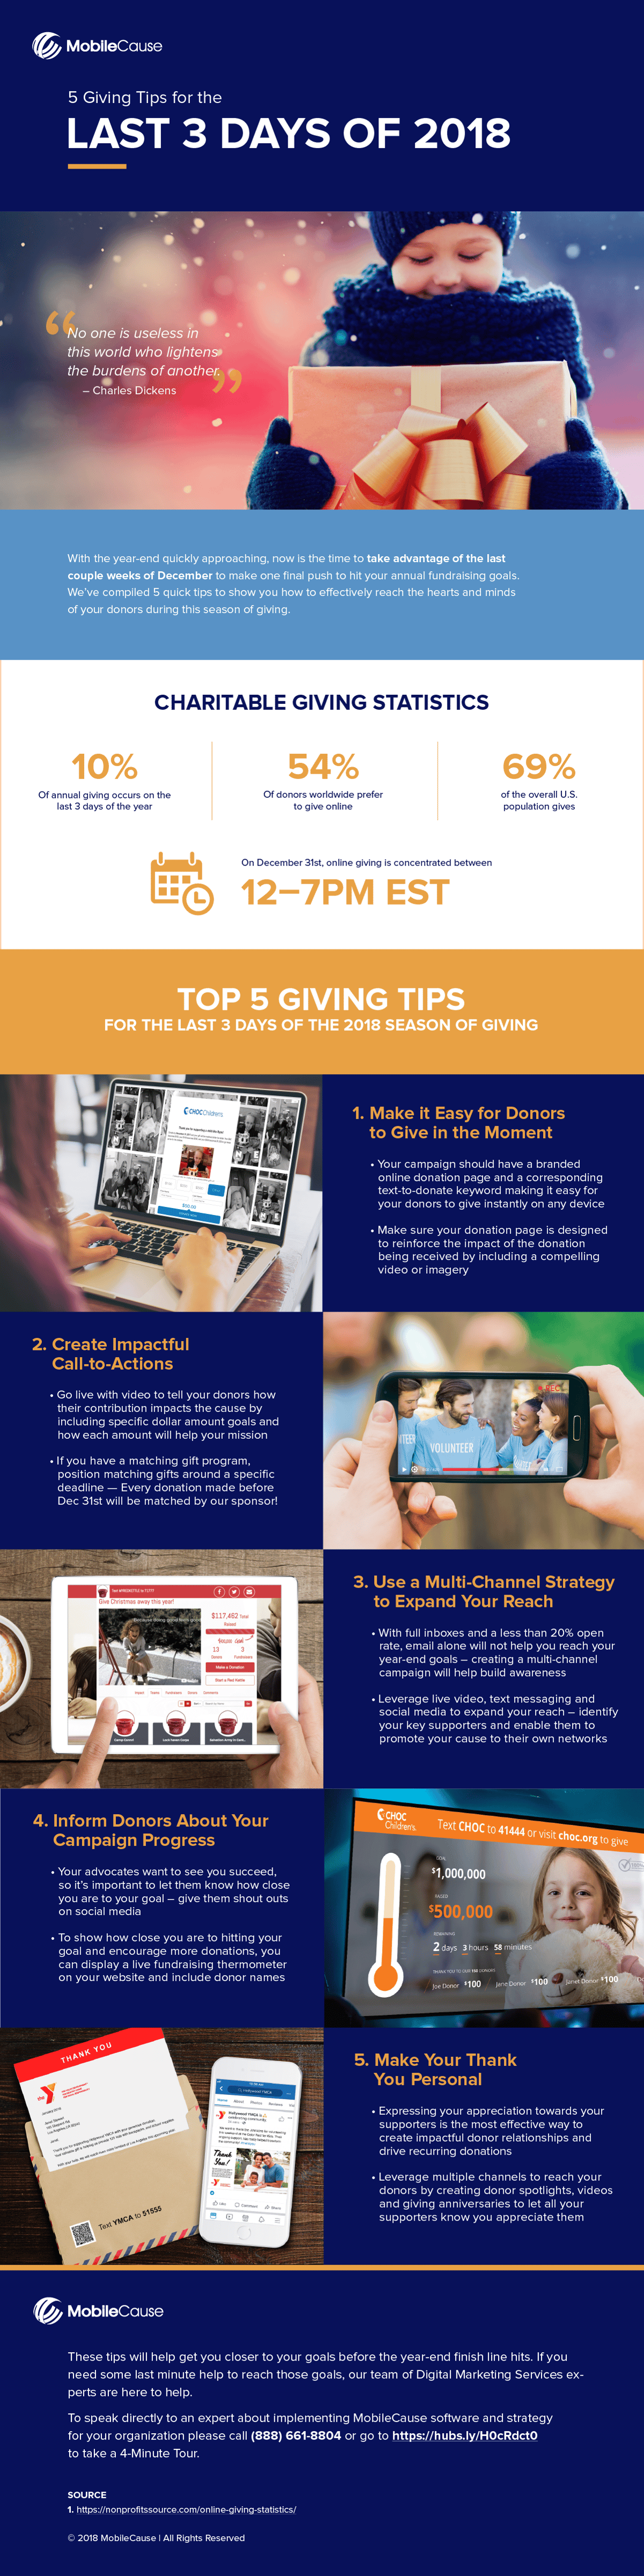 5 Giving Tips for the Last 3 Days of 2018 Infographic